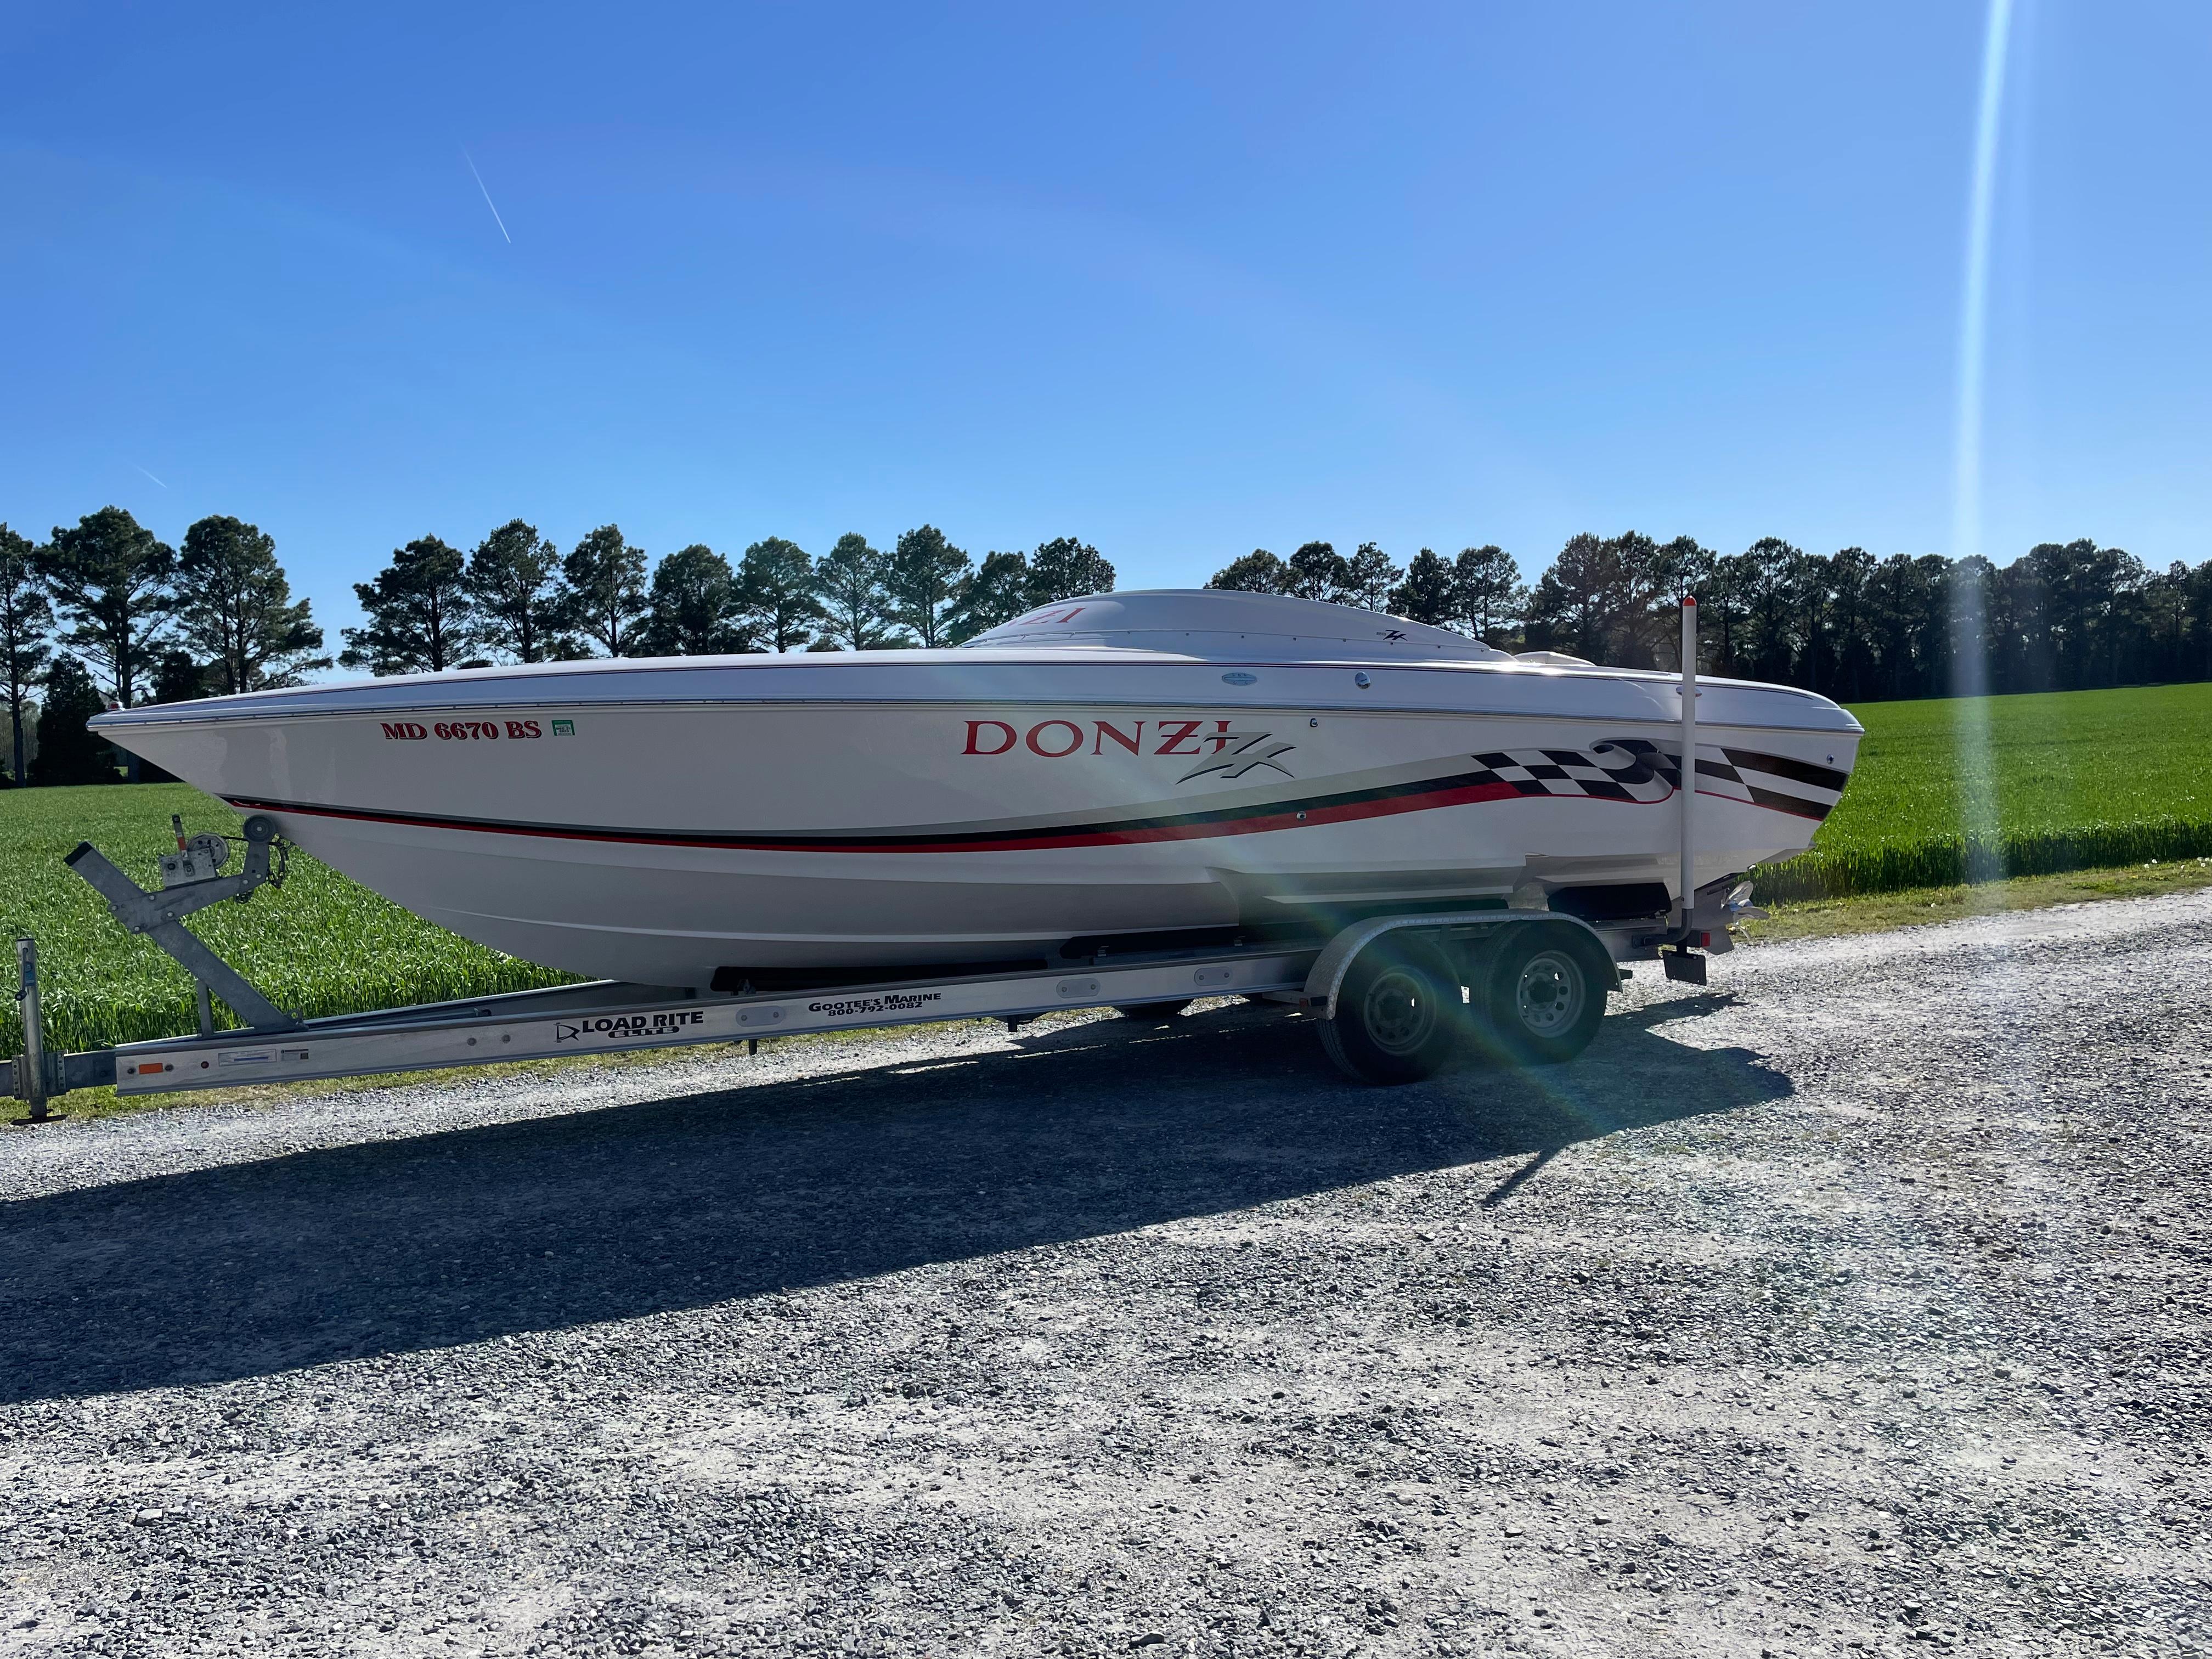 Donzi boats for sale - 2 of 5 pages - Boat Trader